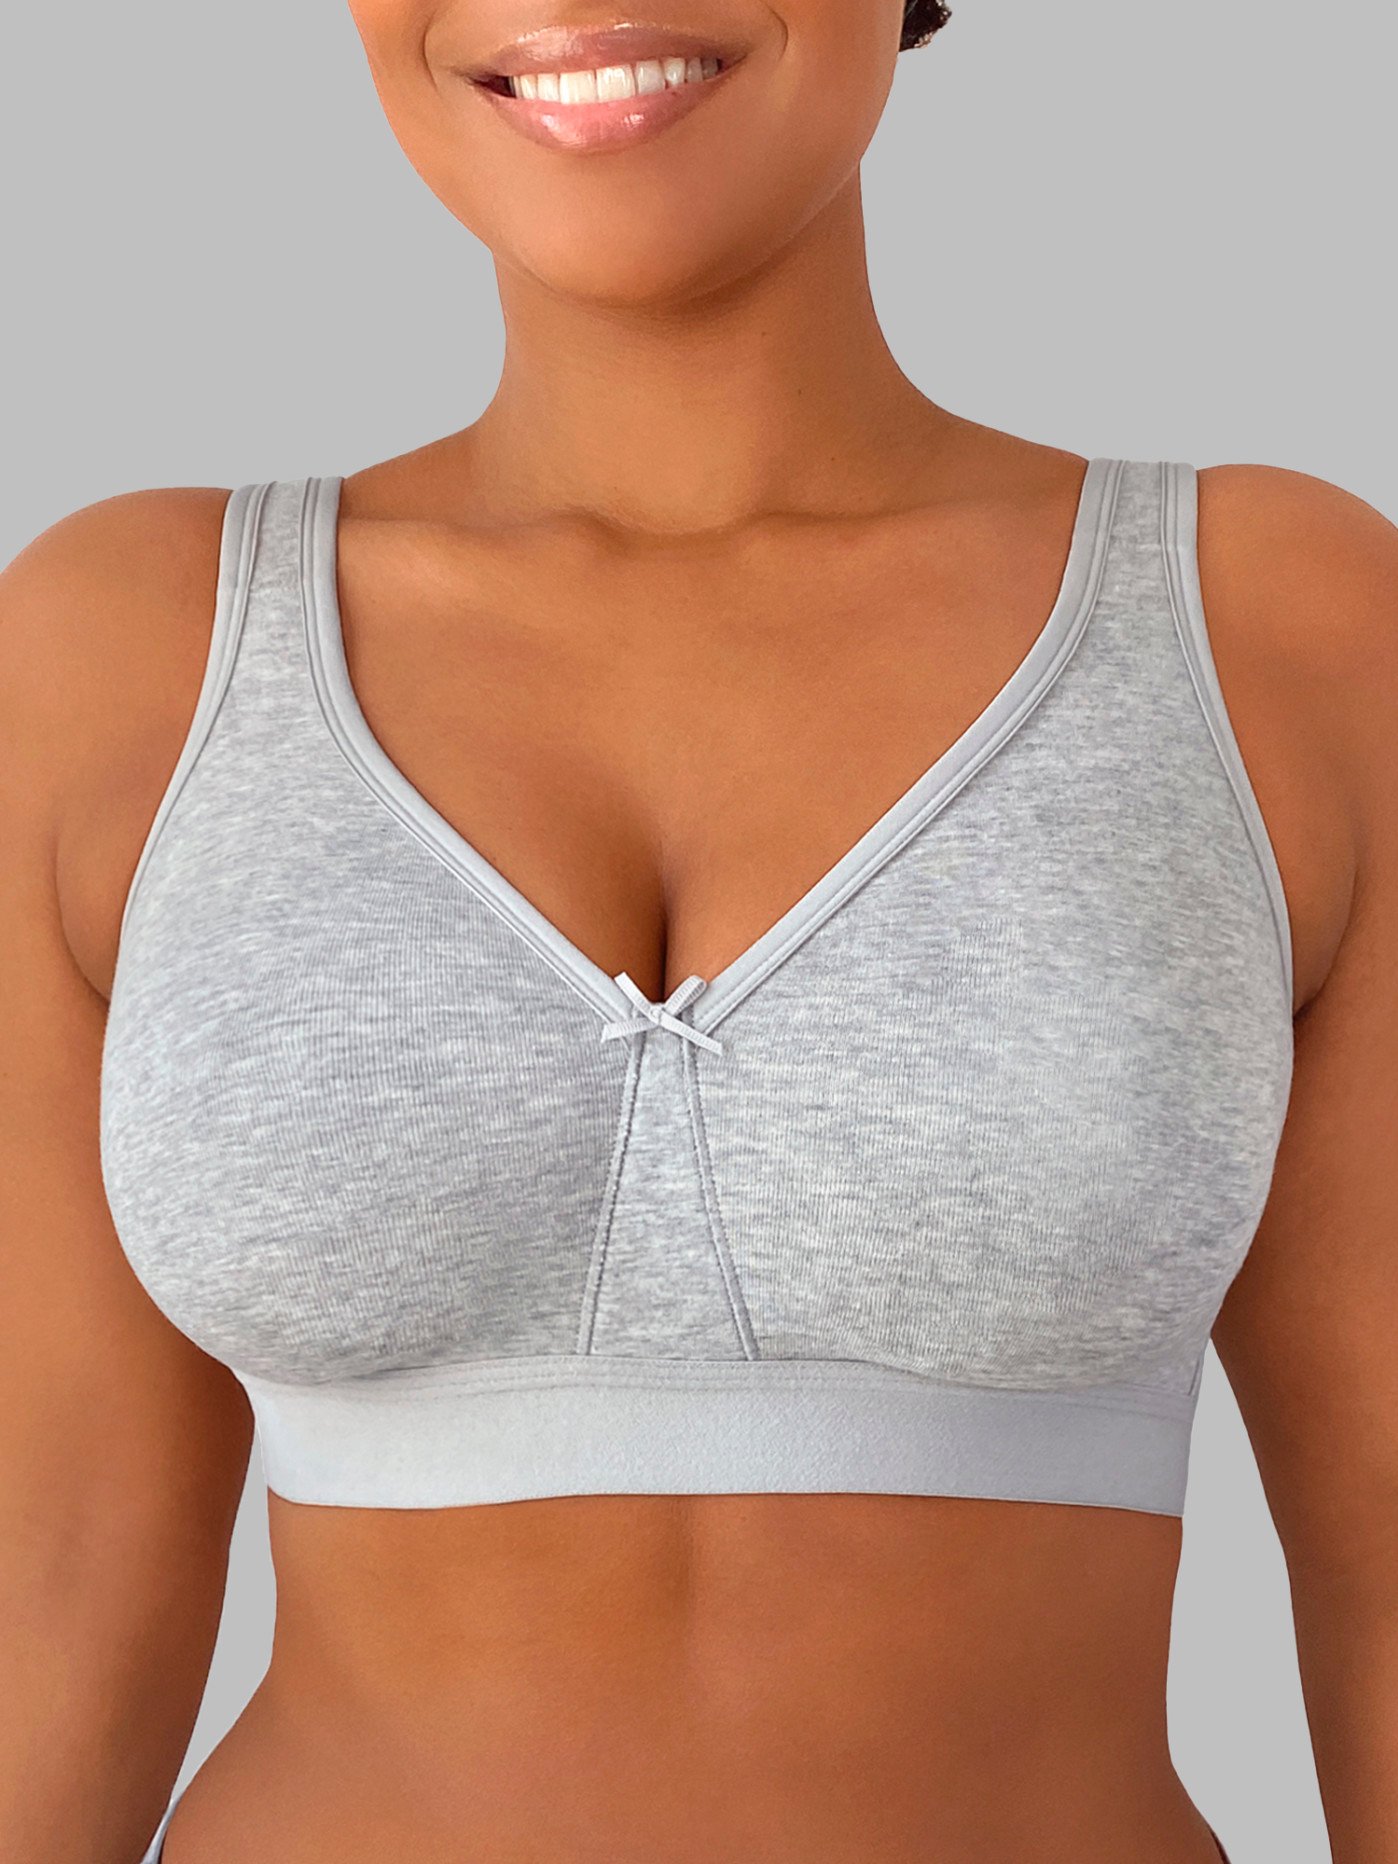 Fruit of The Loom Women's Comfort Front Close Cotton Sports Bra, 2